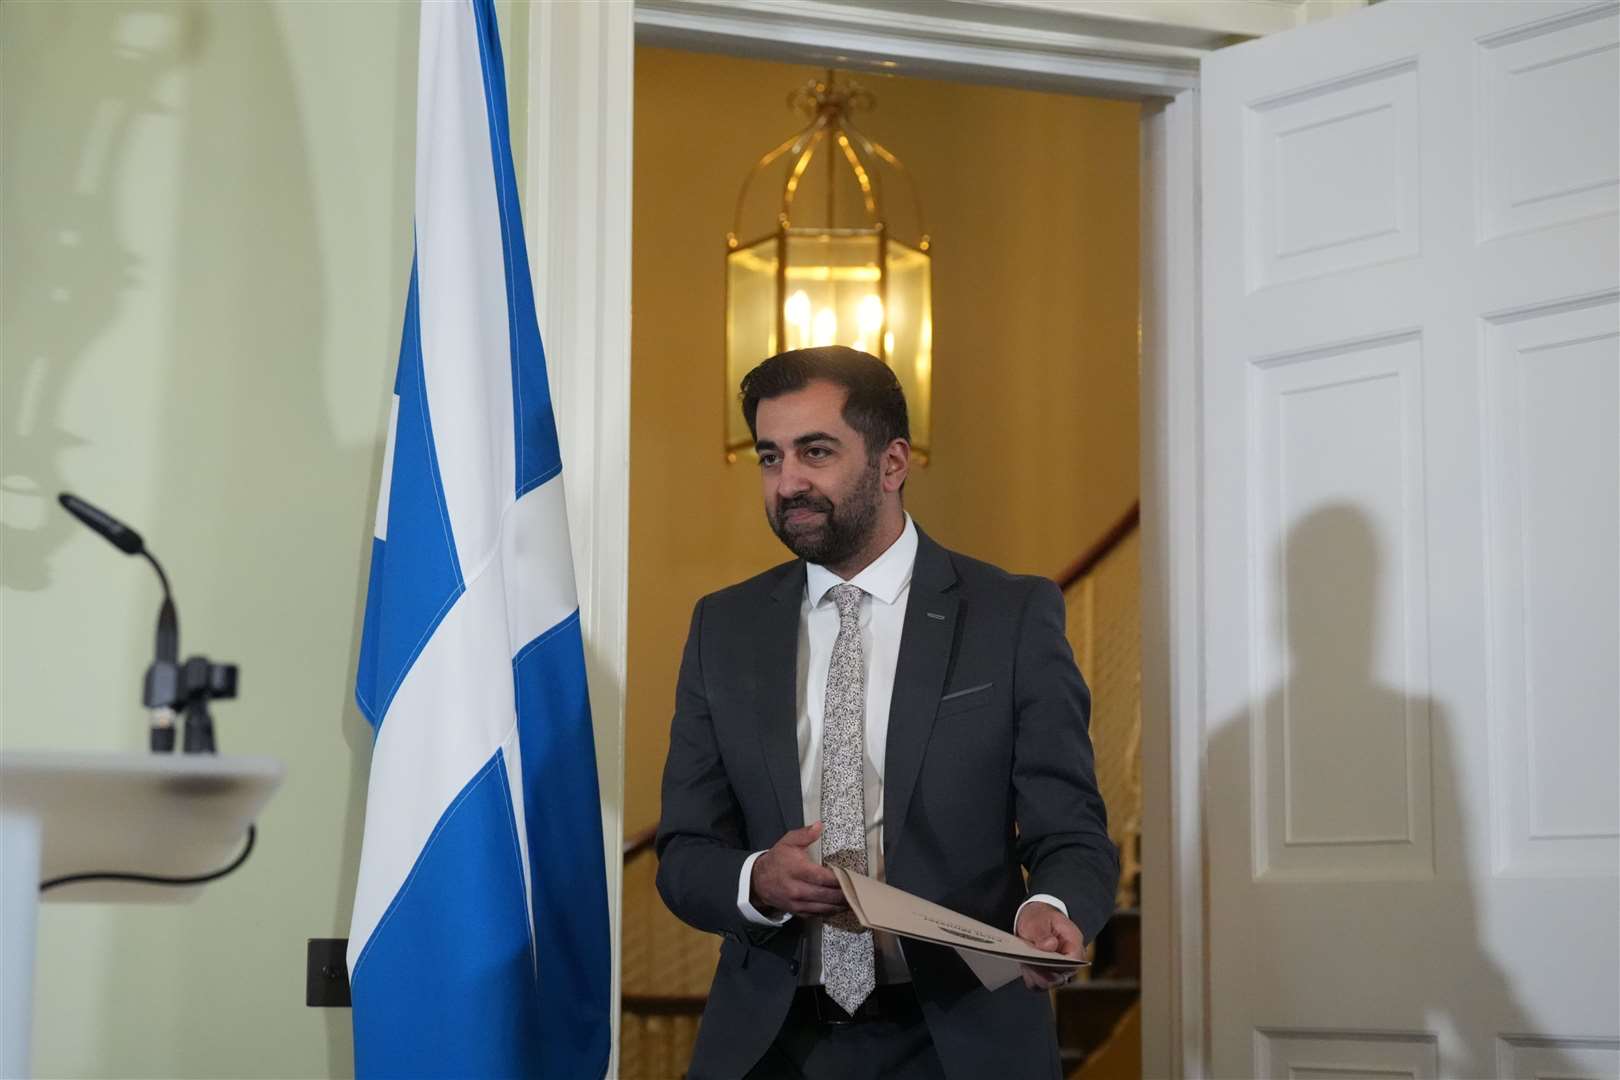 Humza Yousaf arrives for the press conference at Bute House (Andrew Milligan/PA)